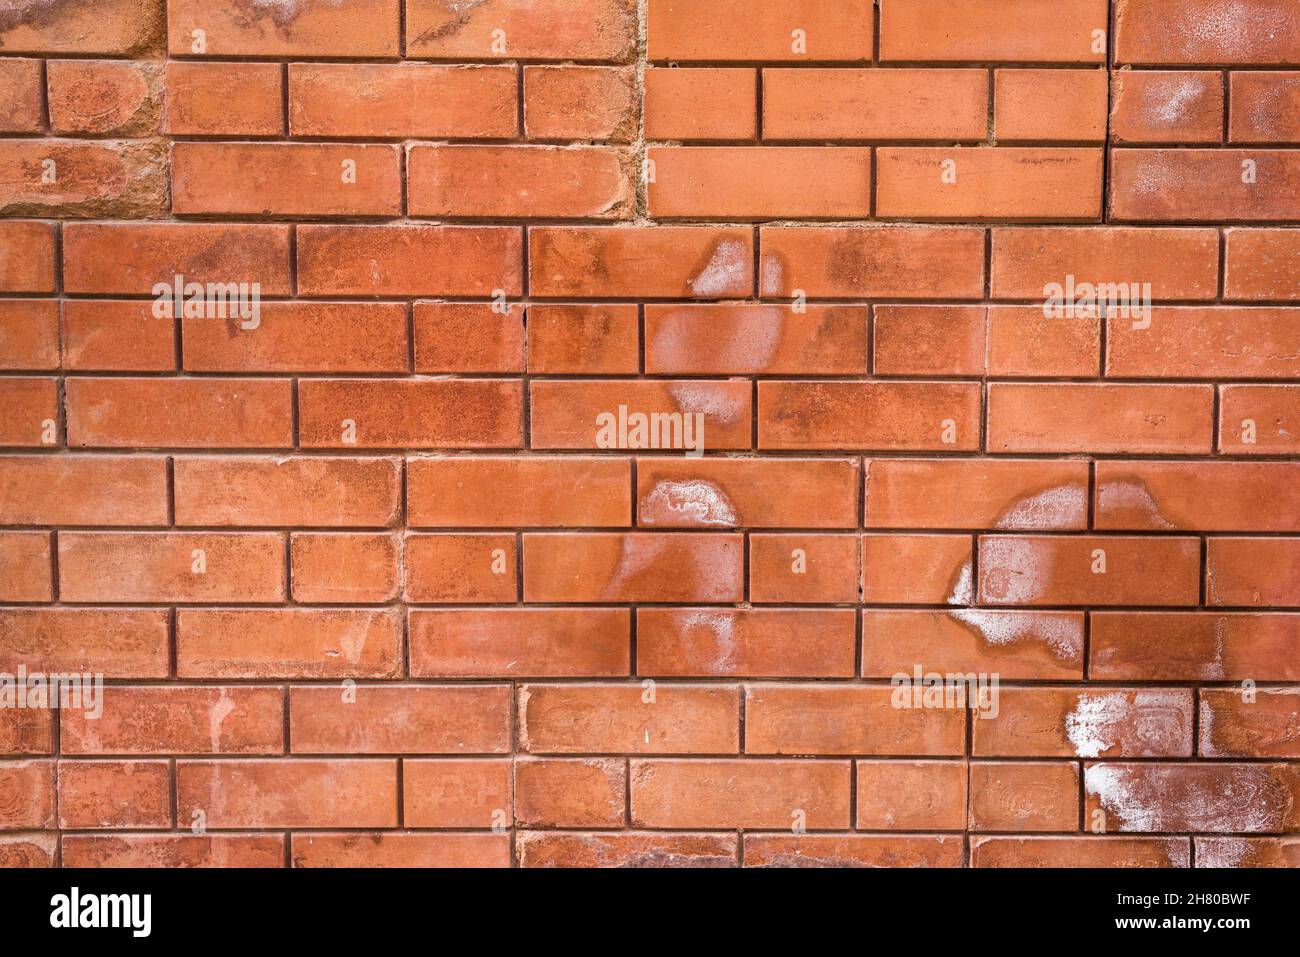 Textured background of a wall made with bricks. Stock Photo